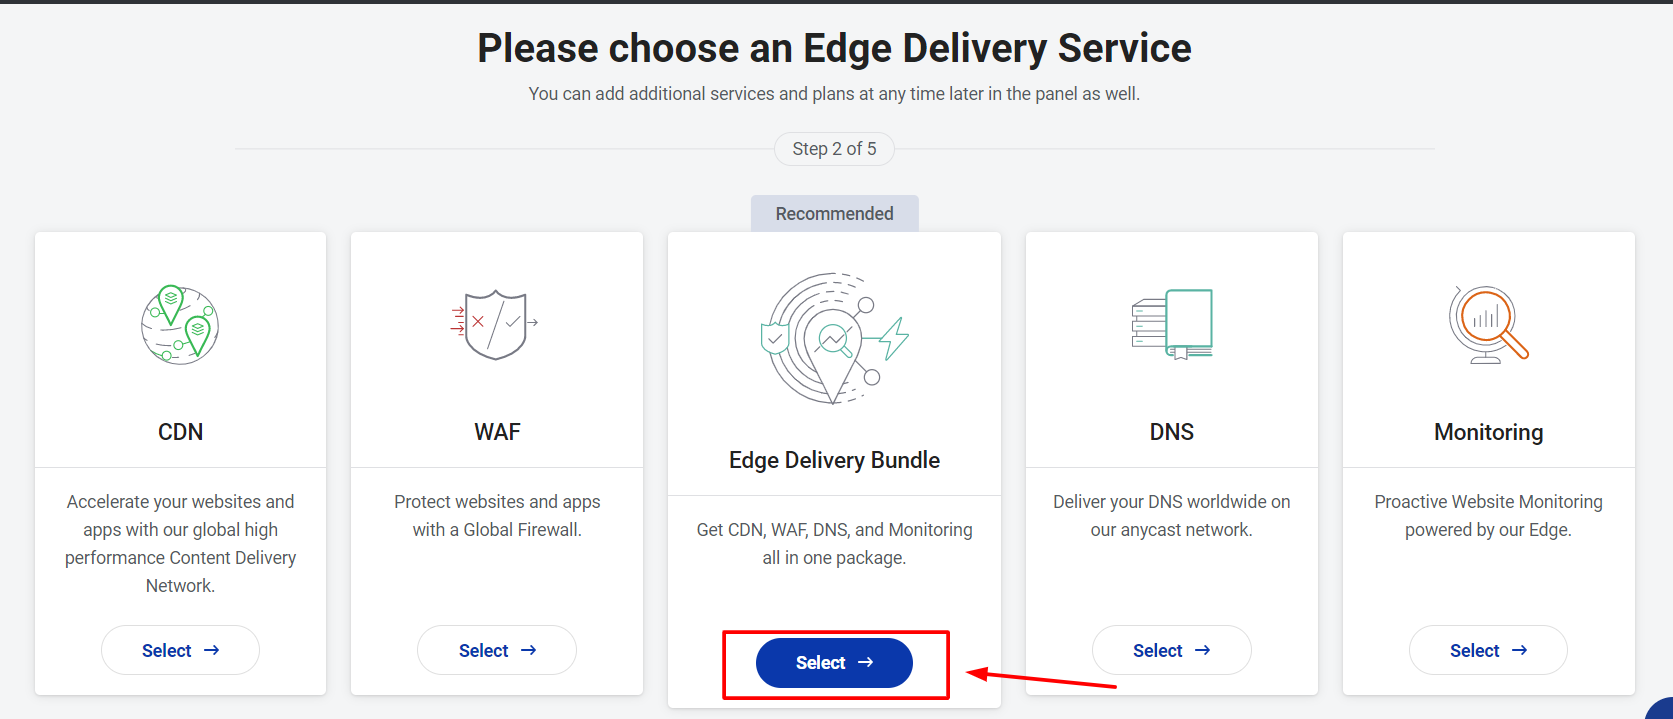 Choose an Edge Delivery Service